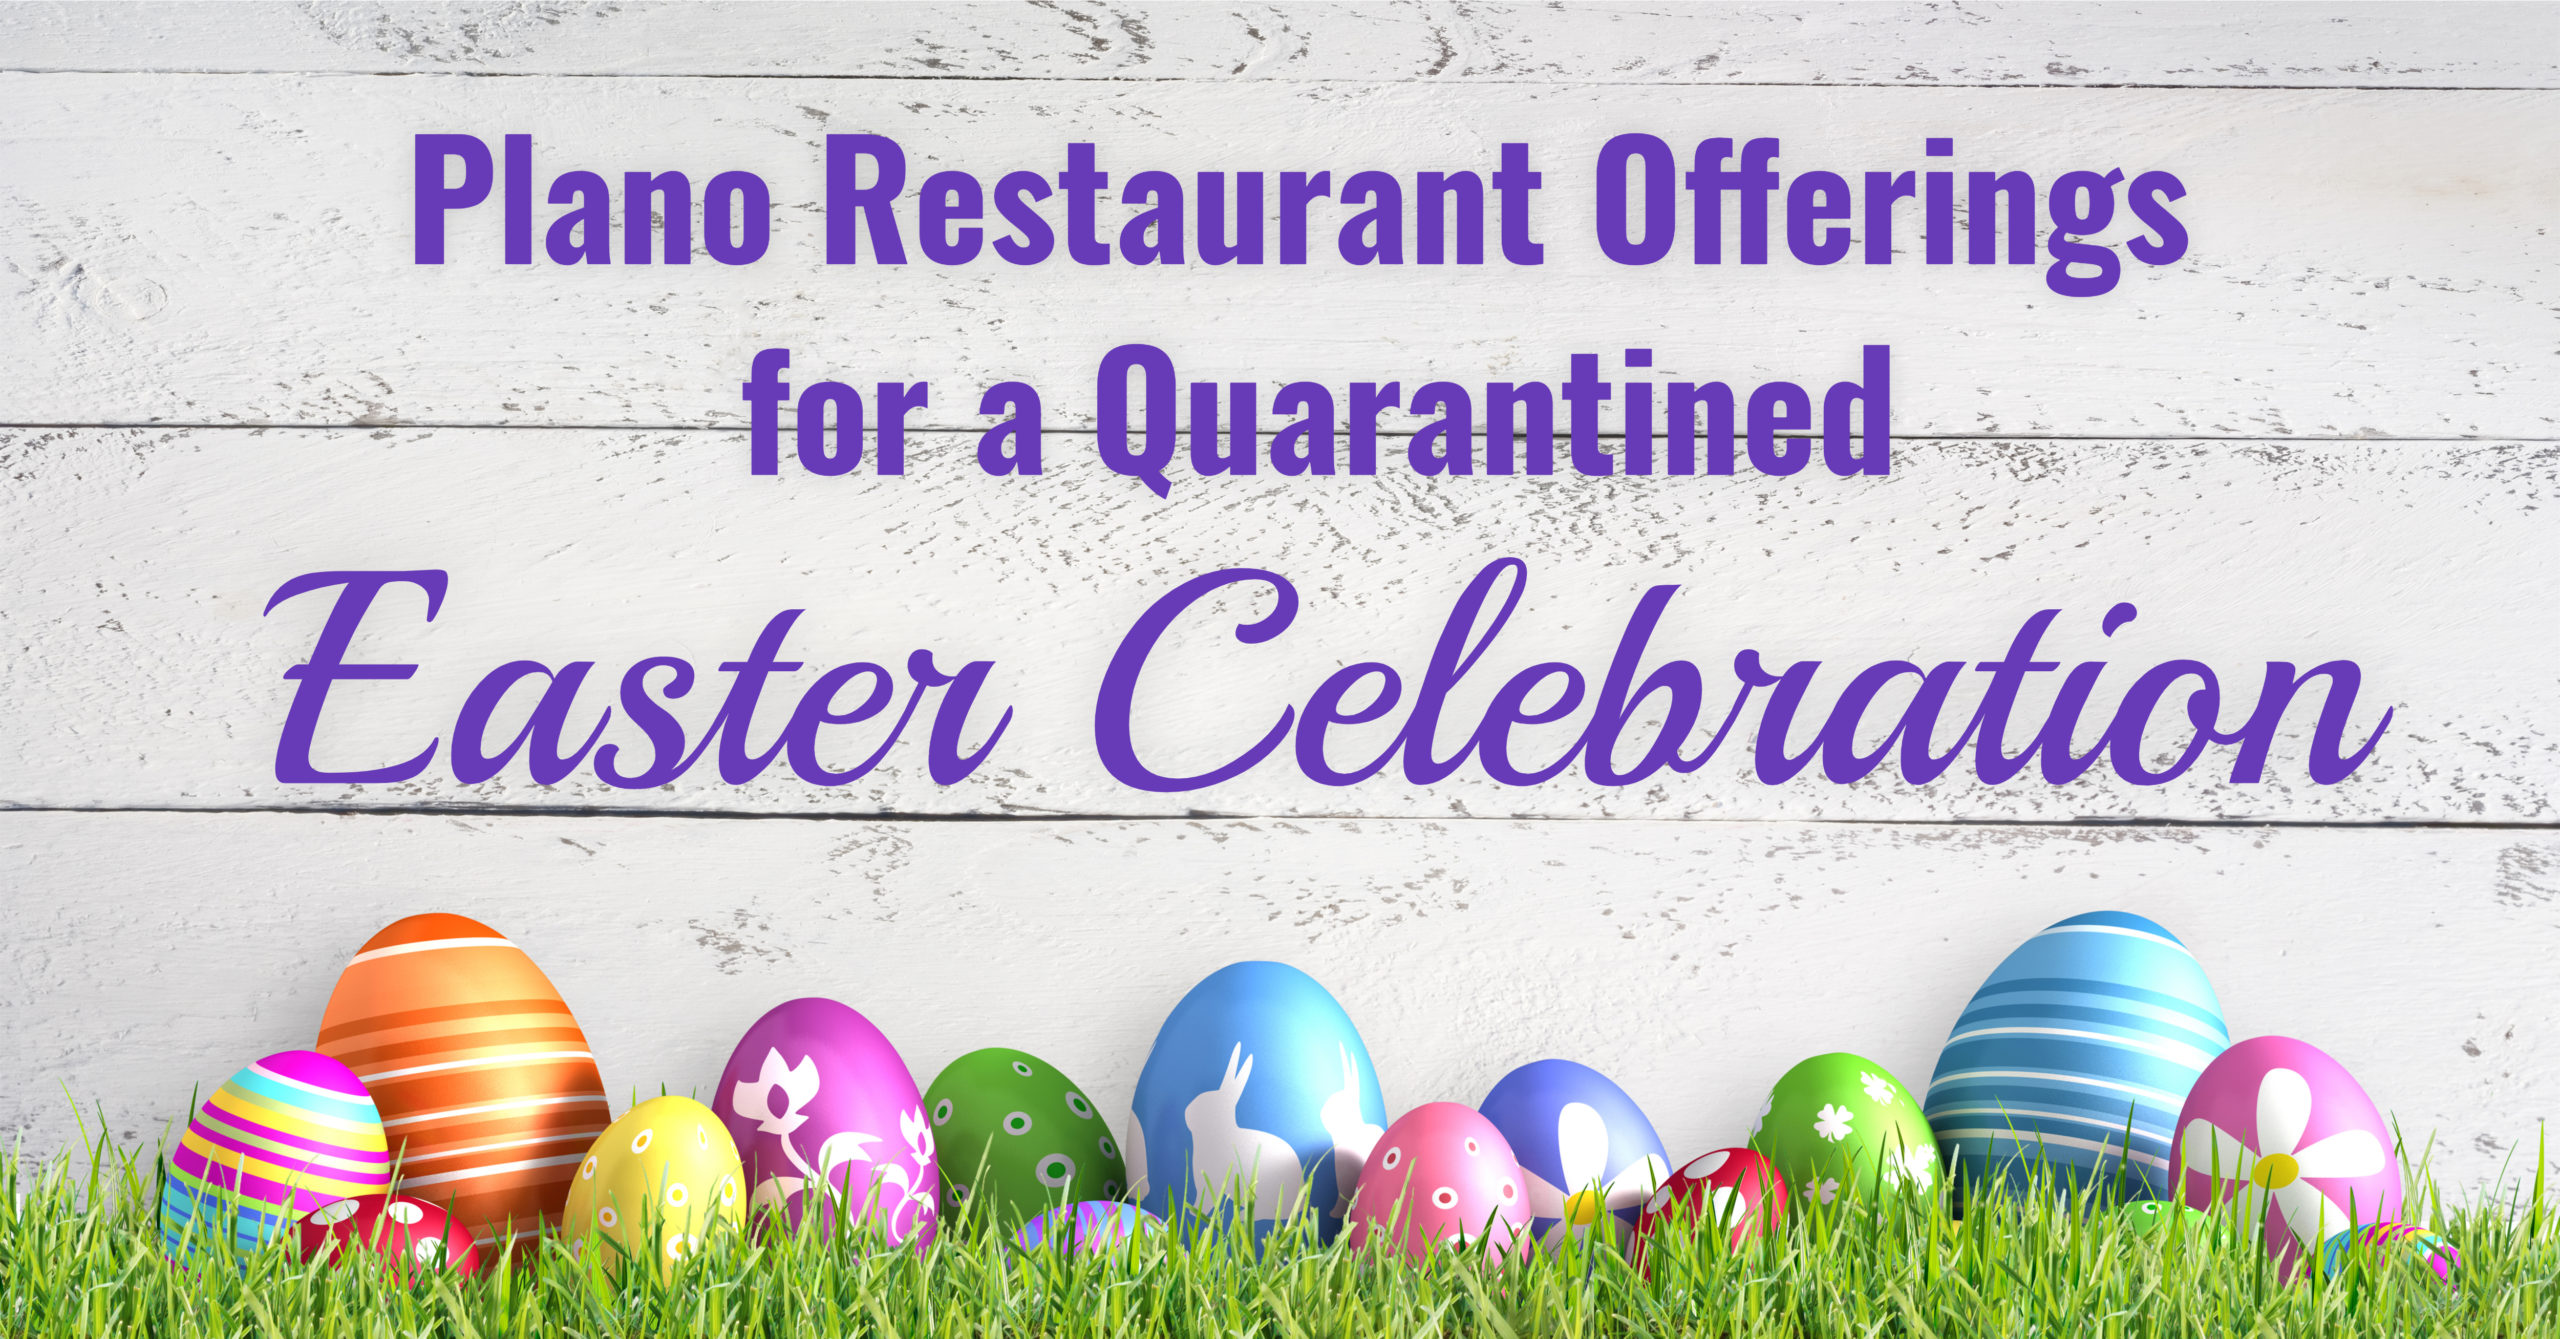 Plano Restaurant Offerings for a Quarantined Easter Celebration graphic